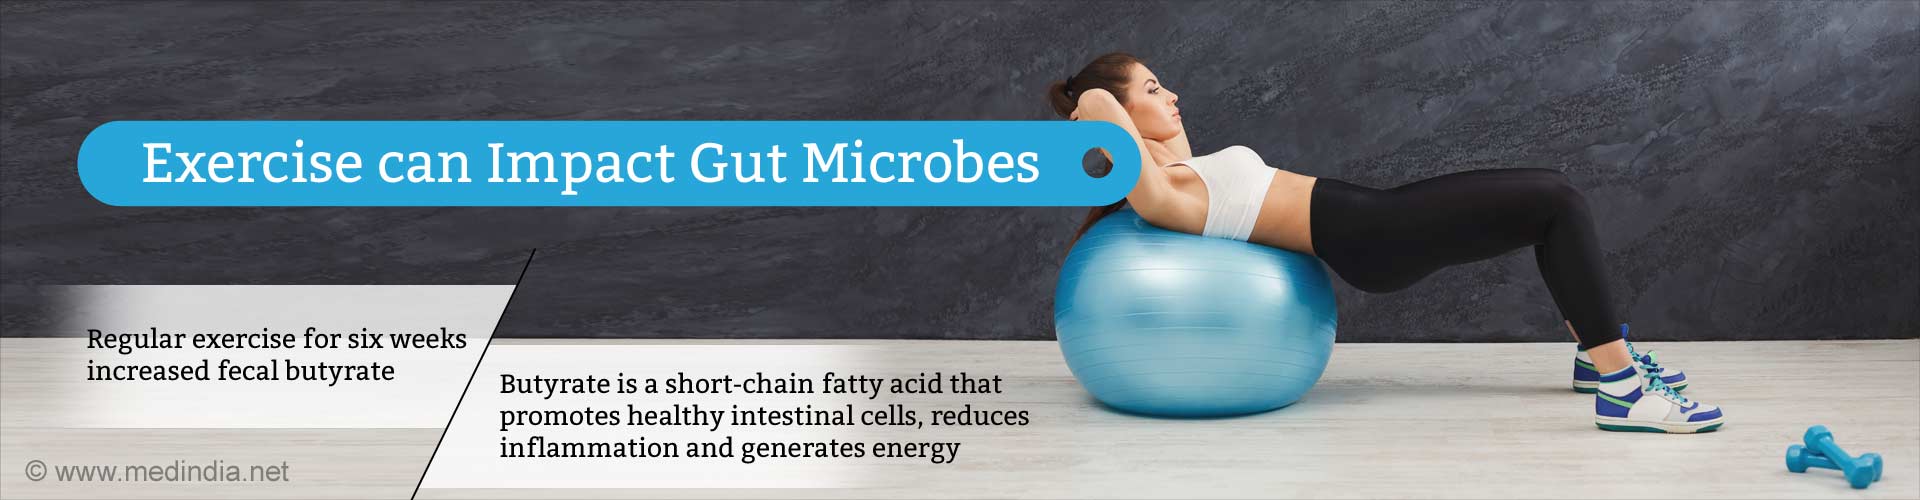 Exercise can Impact Gut Microbes
- Regular exercise for six weeks increased fecal butyrate.
- Butyrate is a a short-chain fatty acid that promotes healthy intestinal cells, reduces inflammation and generates energy
